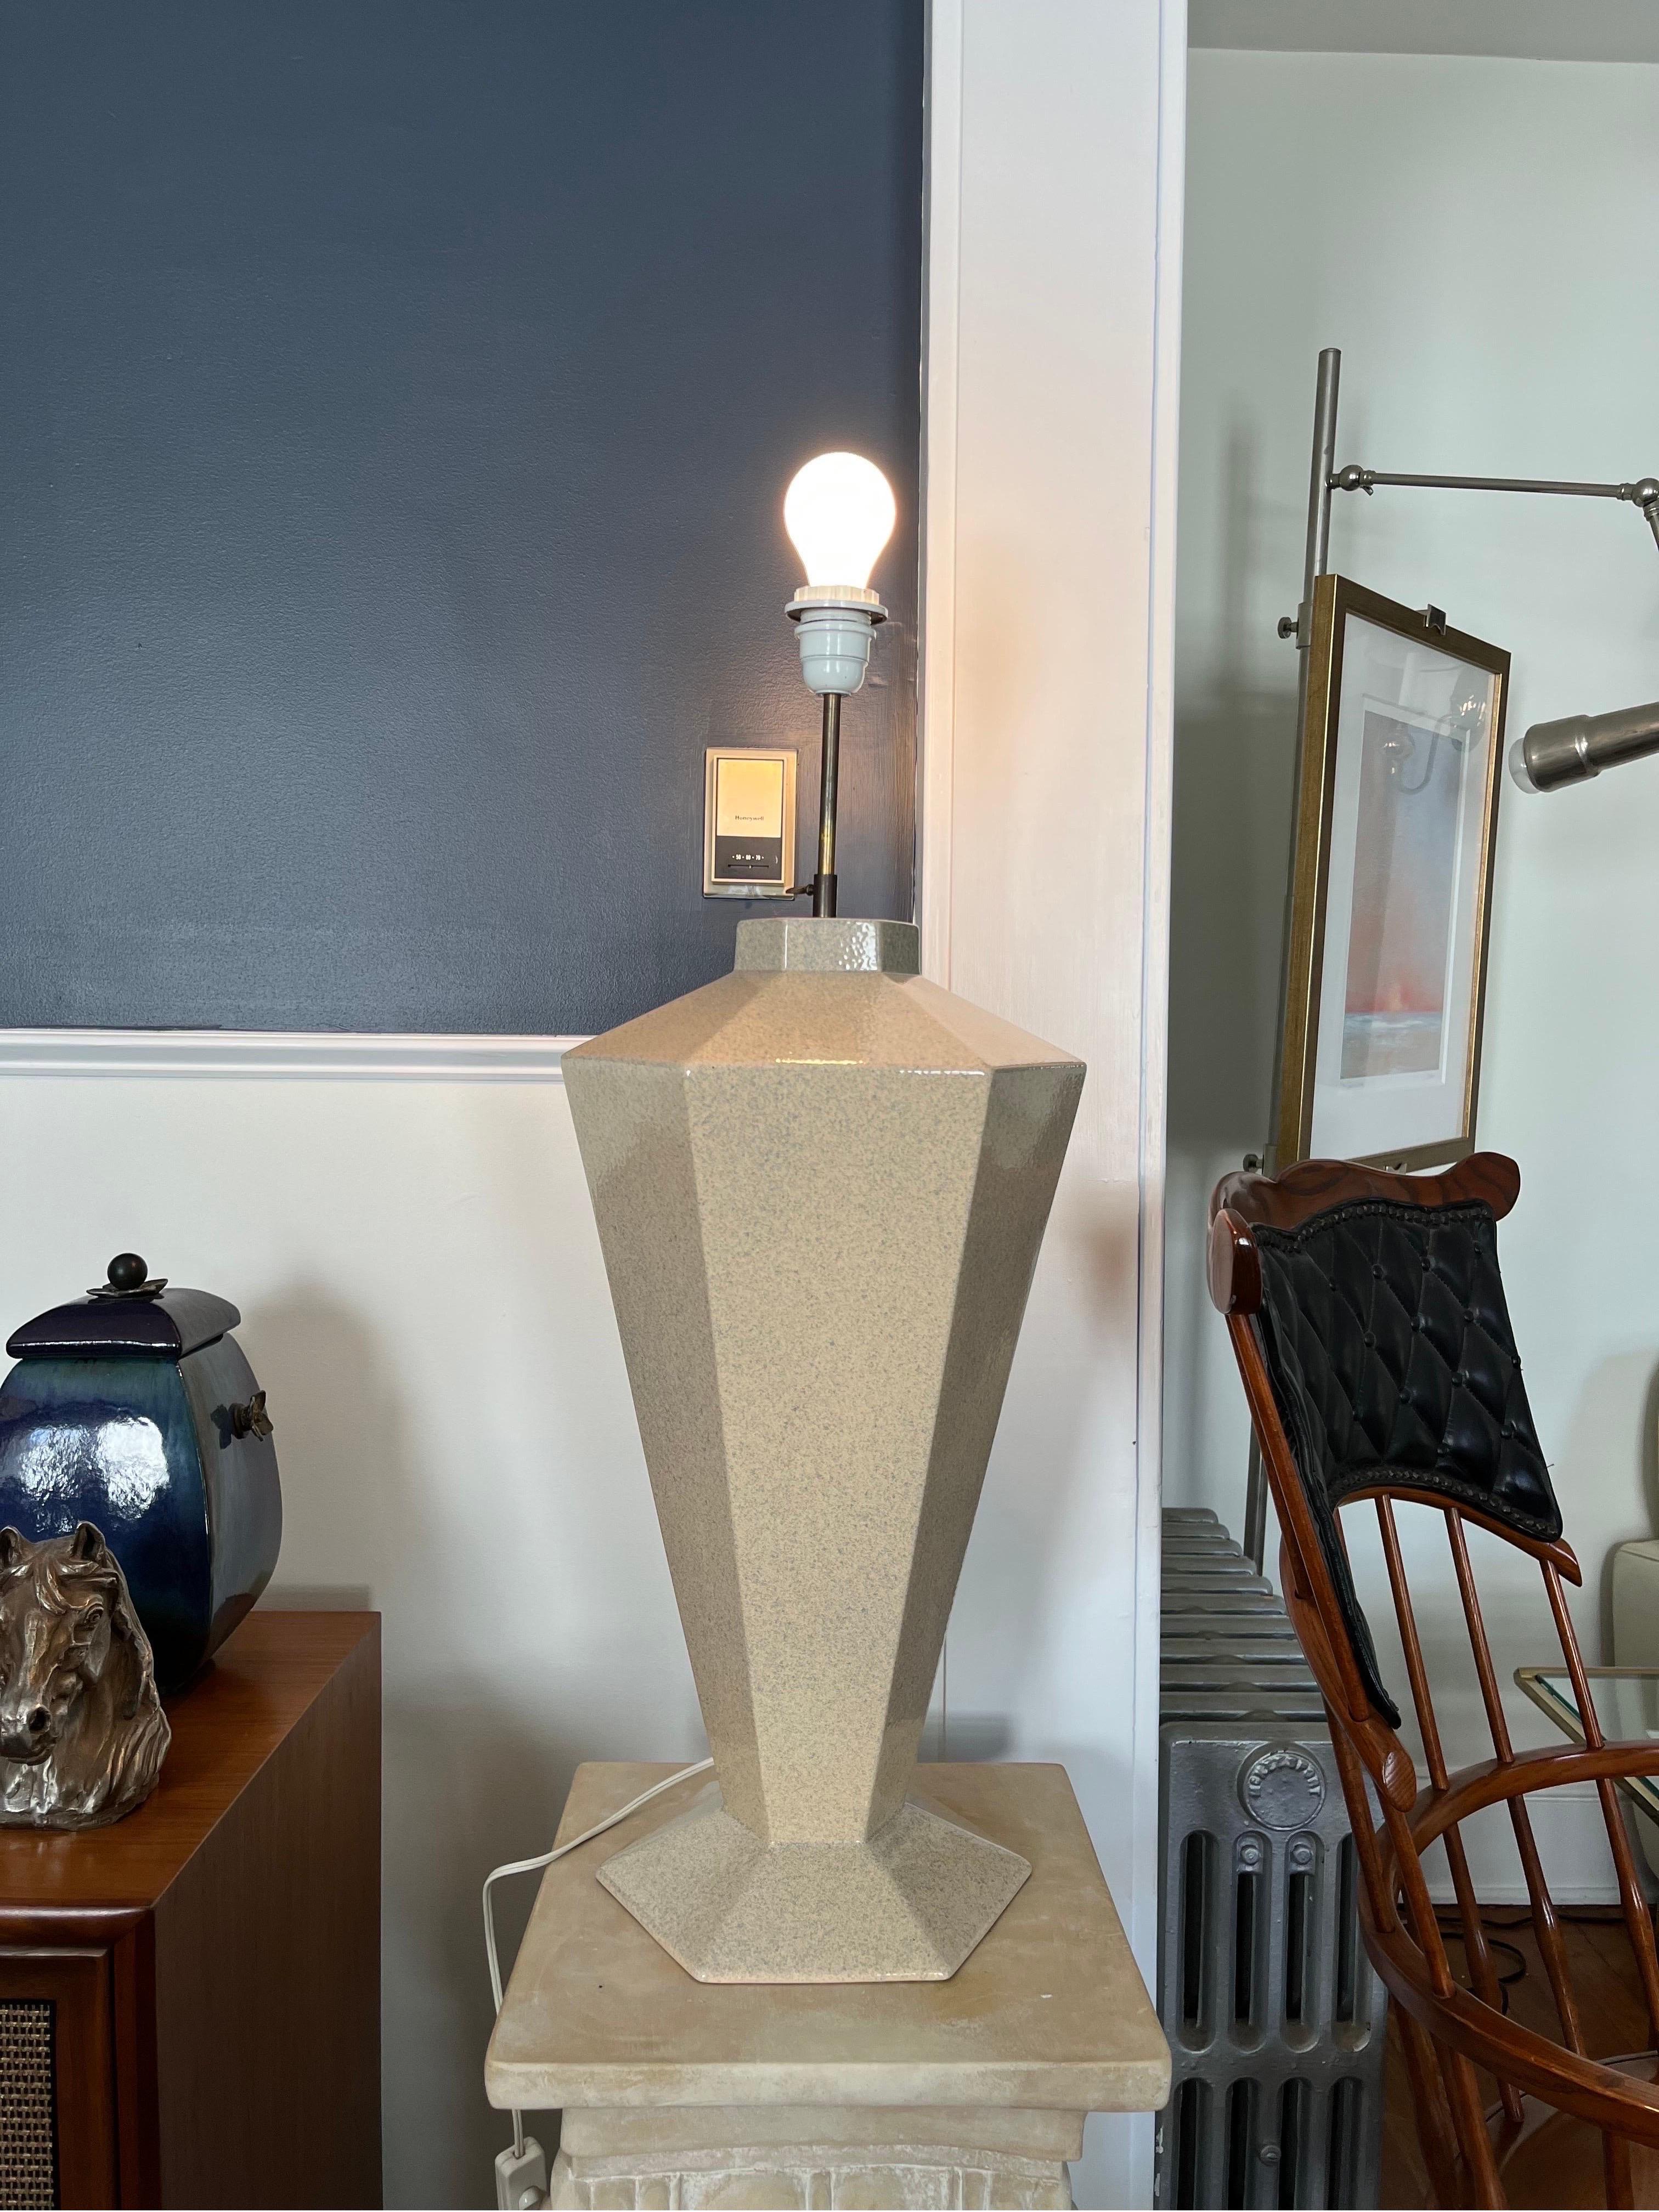 Unique ceramic lamp with a tapered hexagon design. Postmodern Deco styling with a glossy speckled ceramic finish. Adjustable stem an socket for versatility with shade choice.